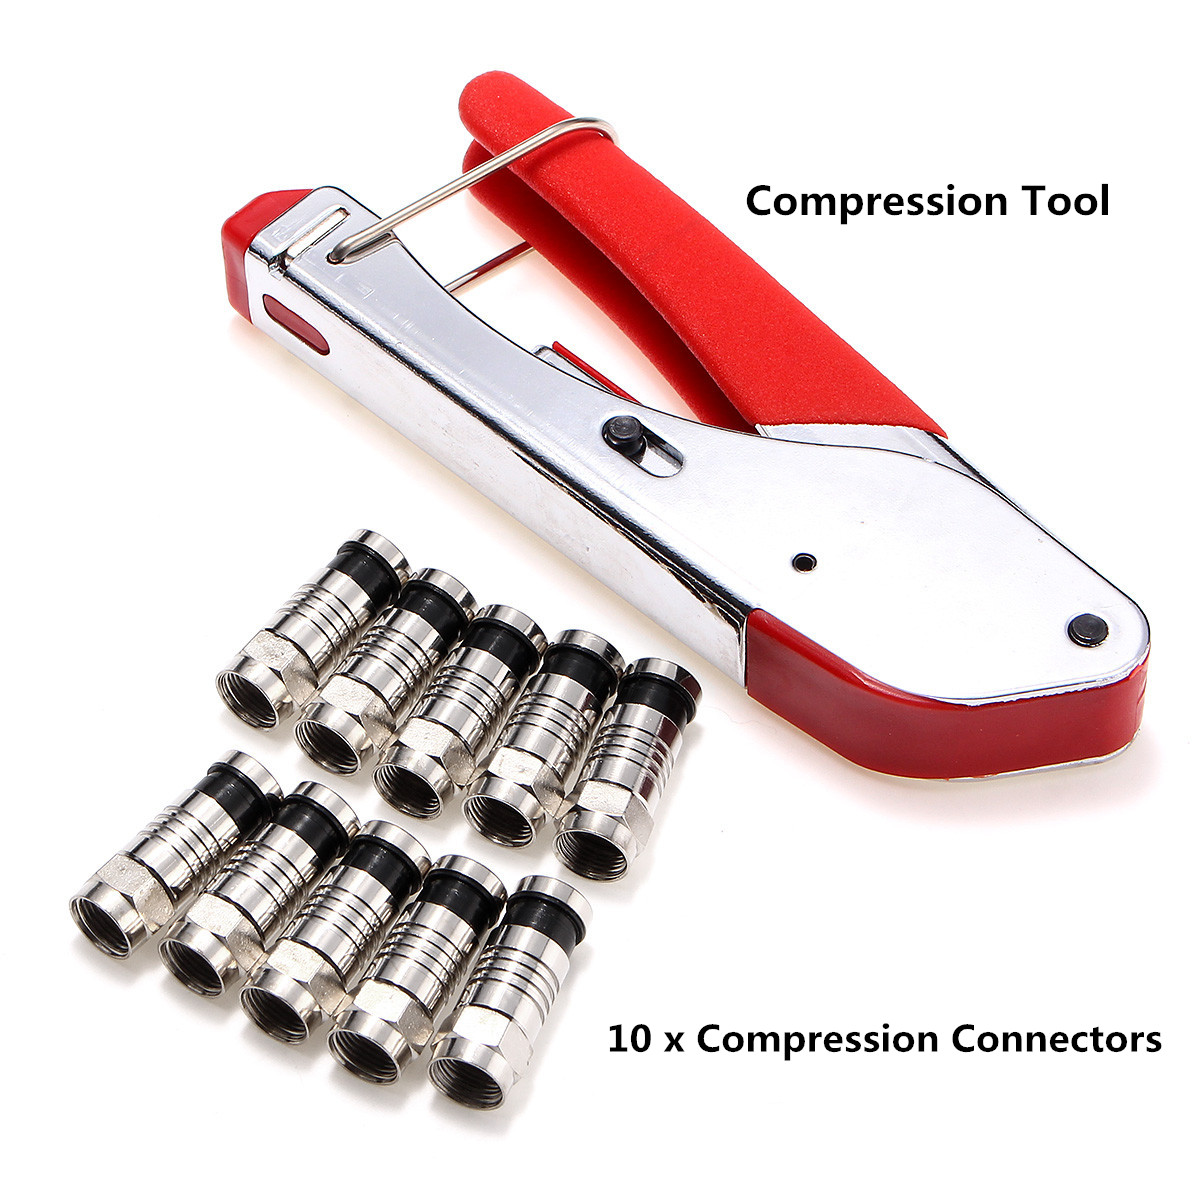 Universal F-Type Compression Tool Cable Coaxial Crimper Adapter+10 RG6 Connector 